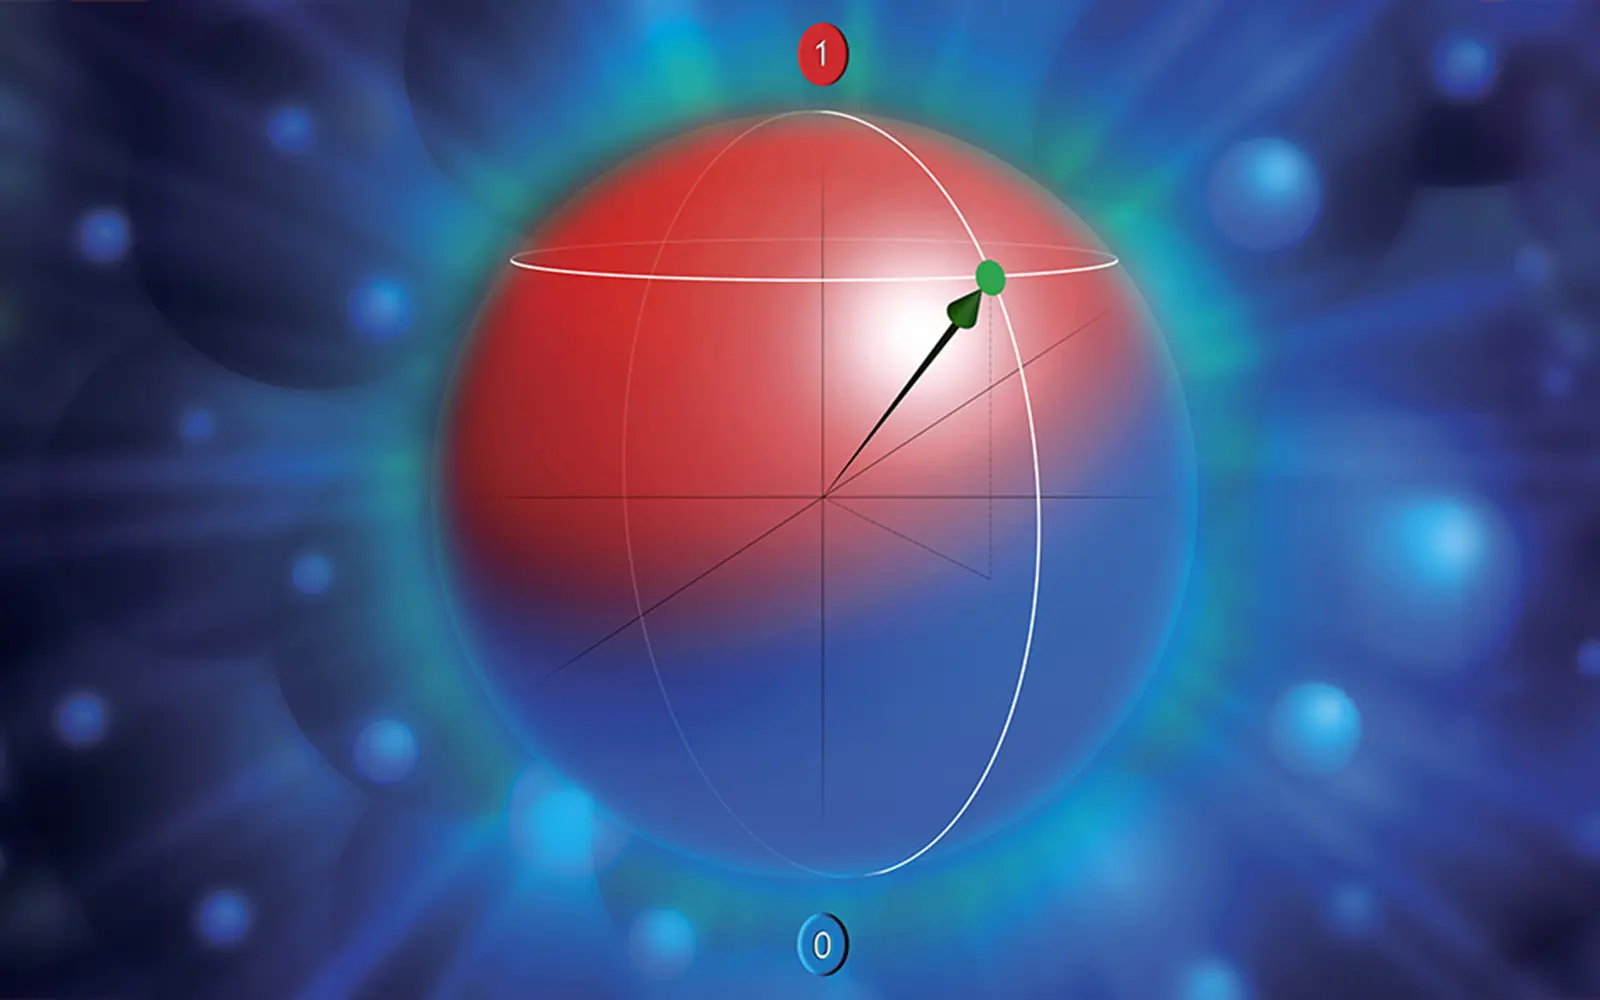 Large red sphere representing a qubit.